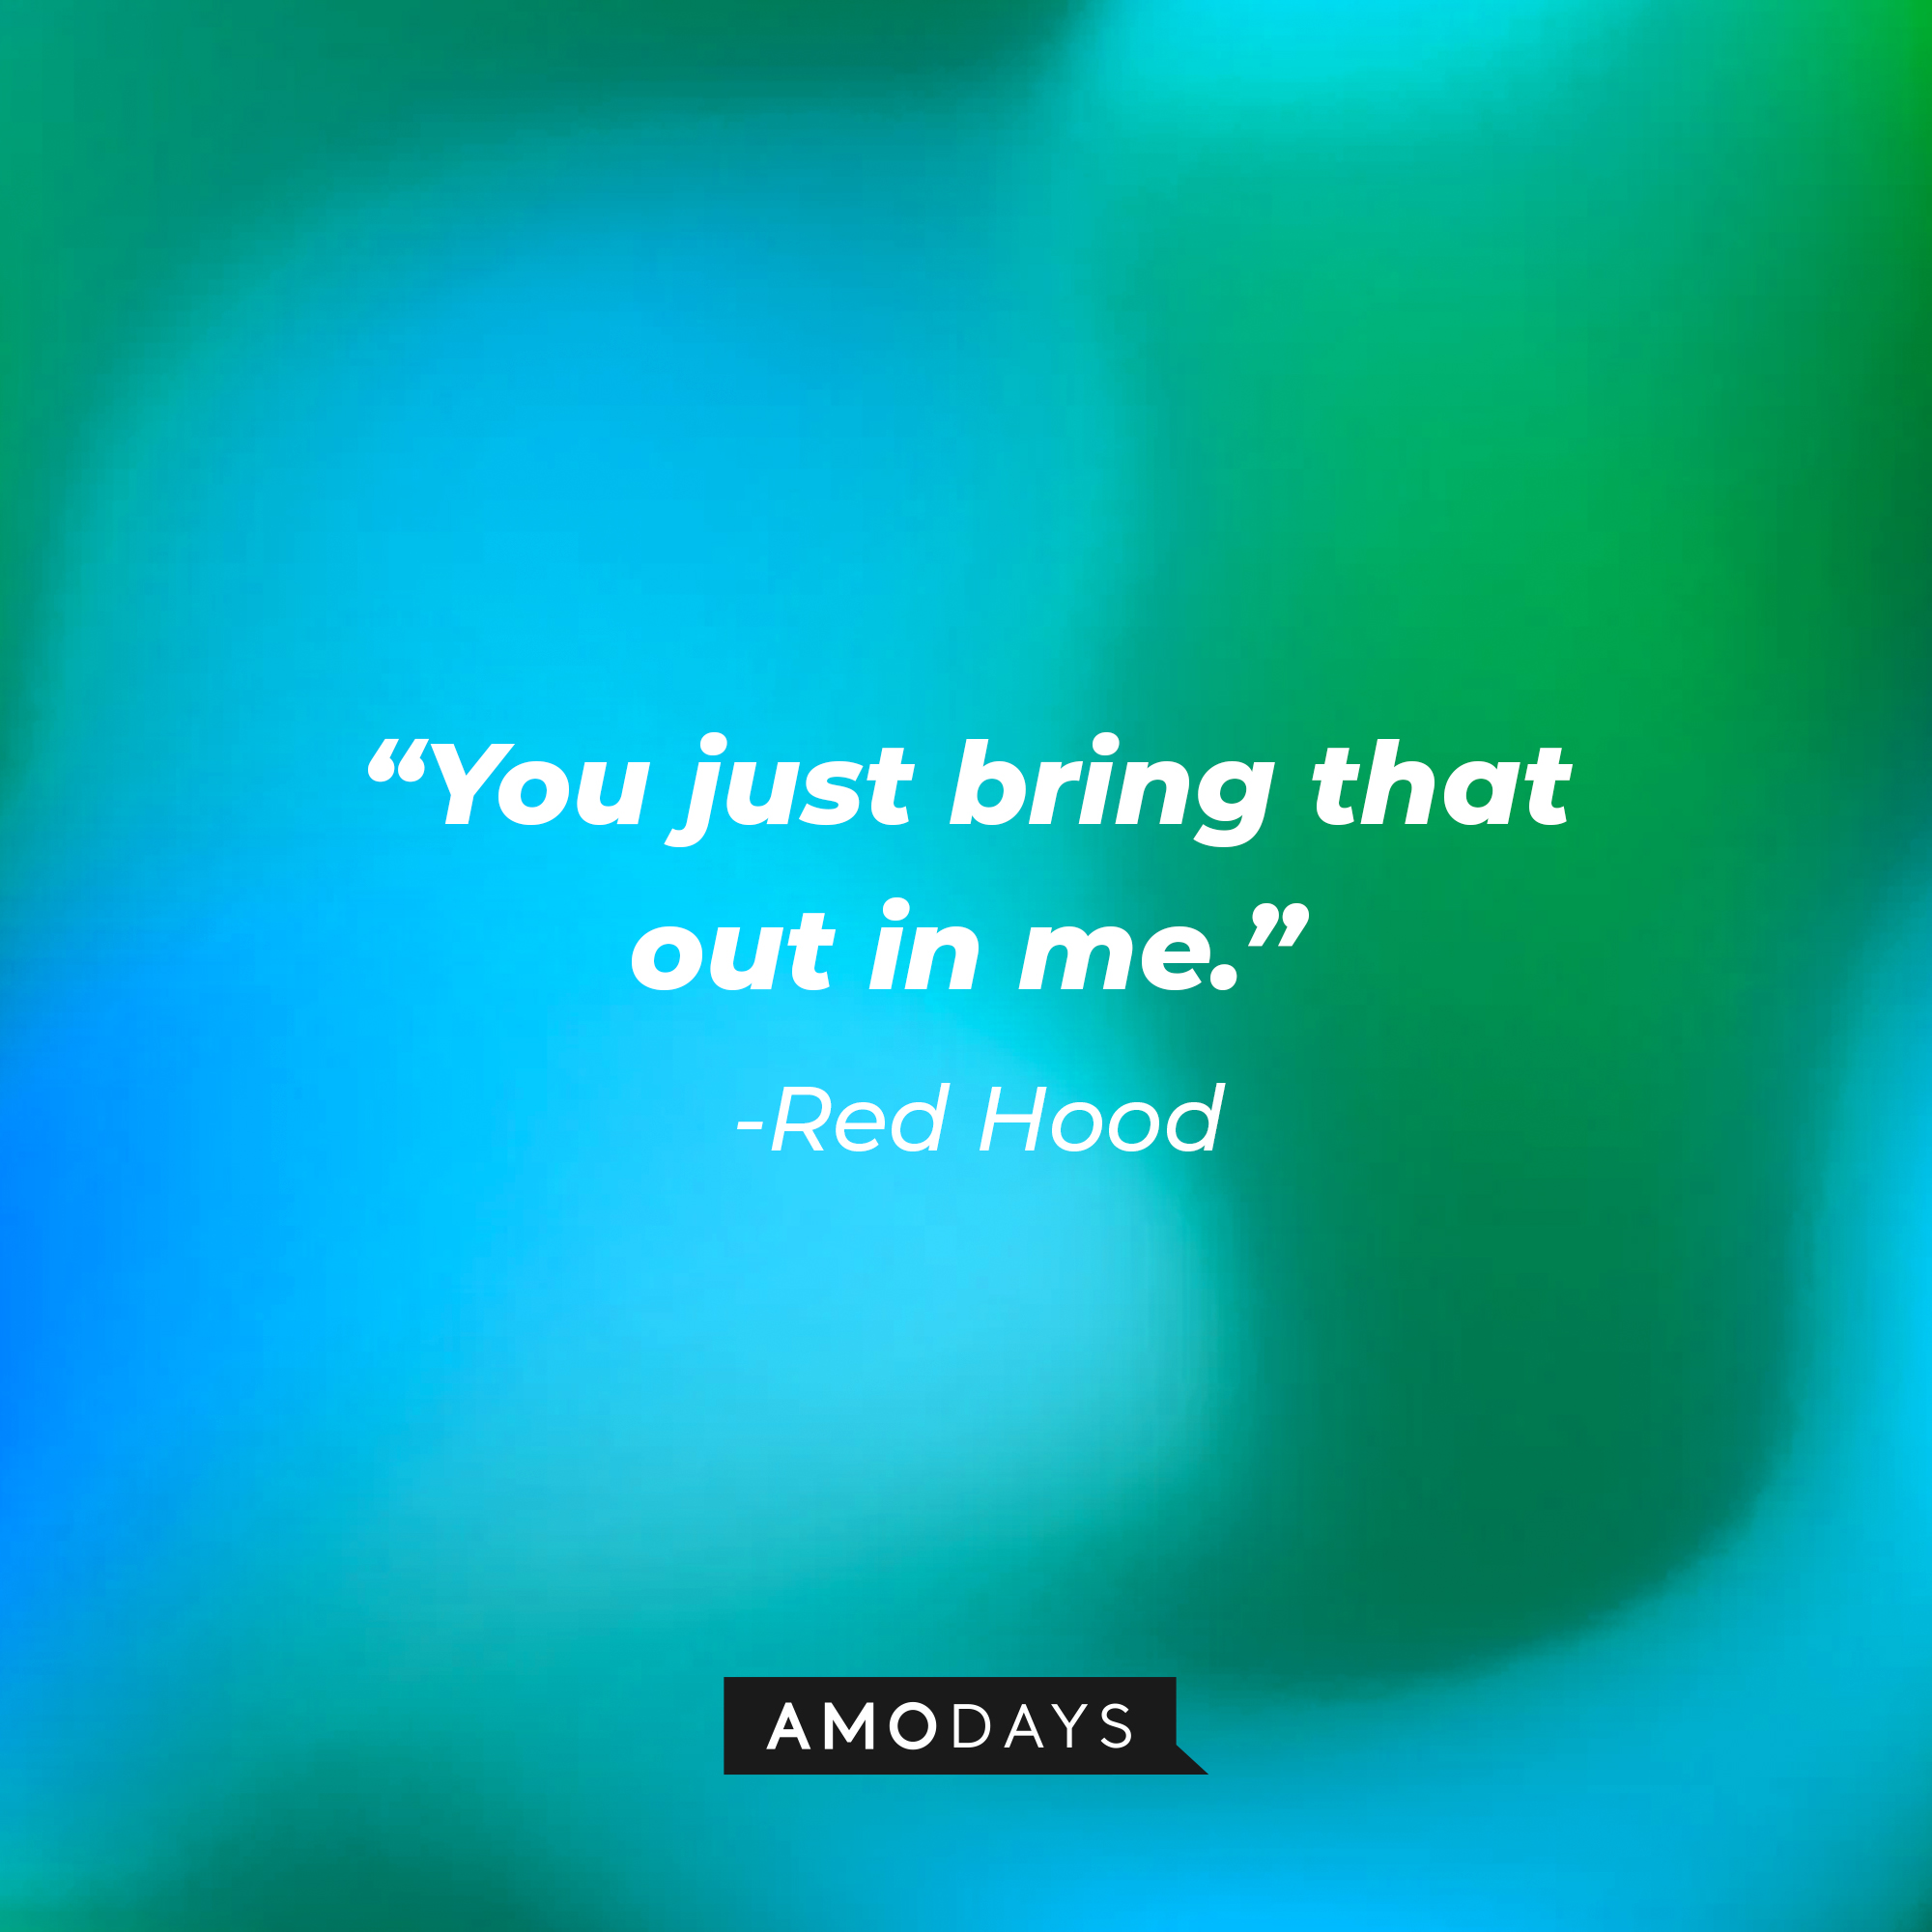 Red Hood’s quote: "You just bring that out in me." | Source: AmoDays